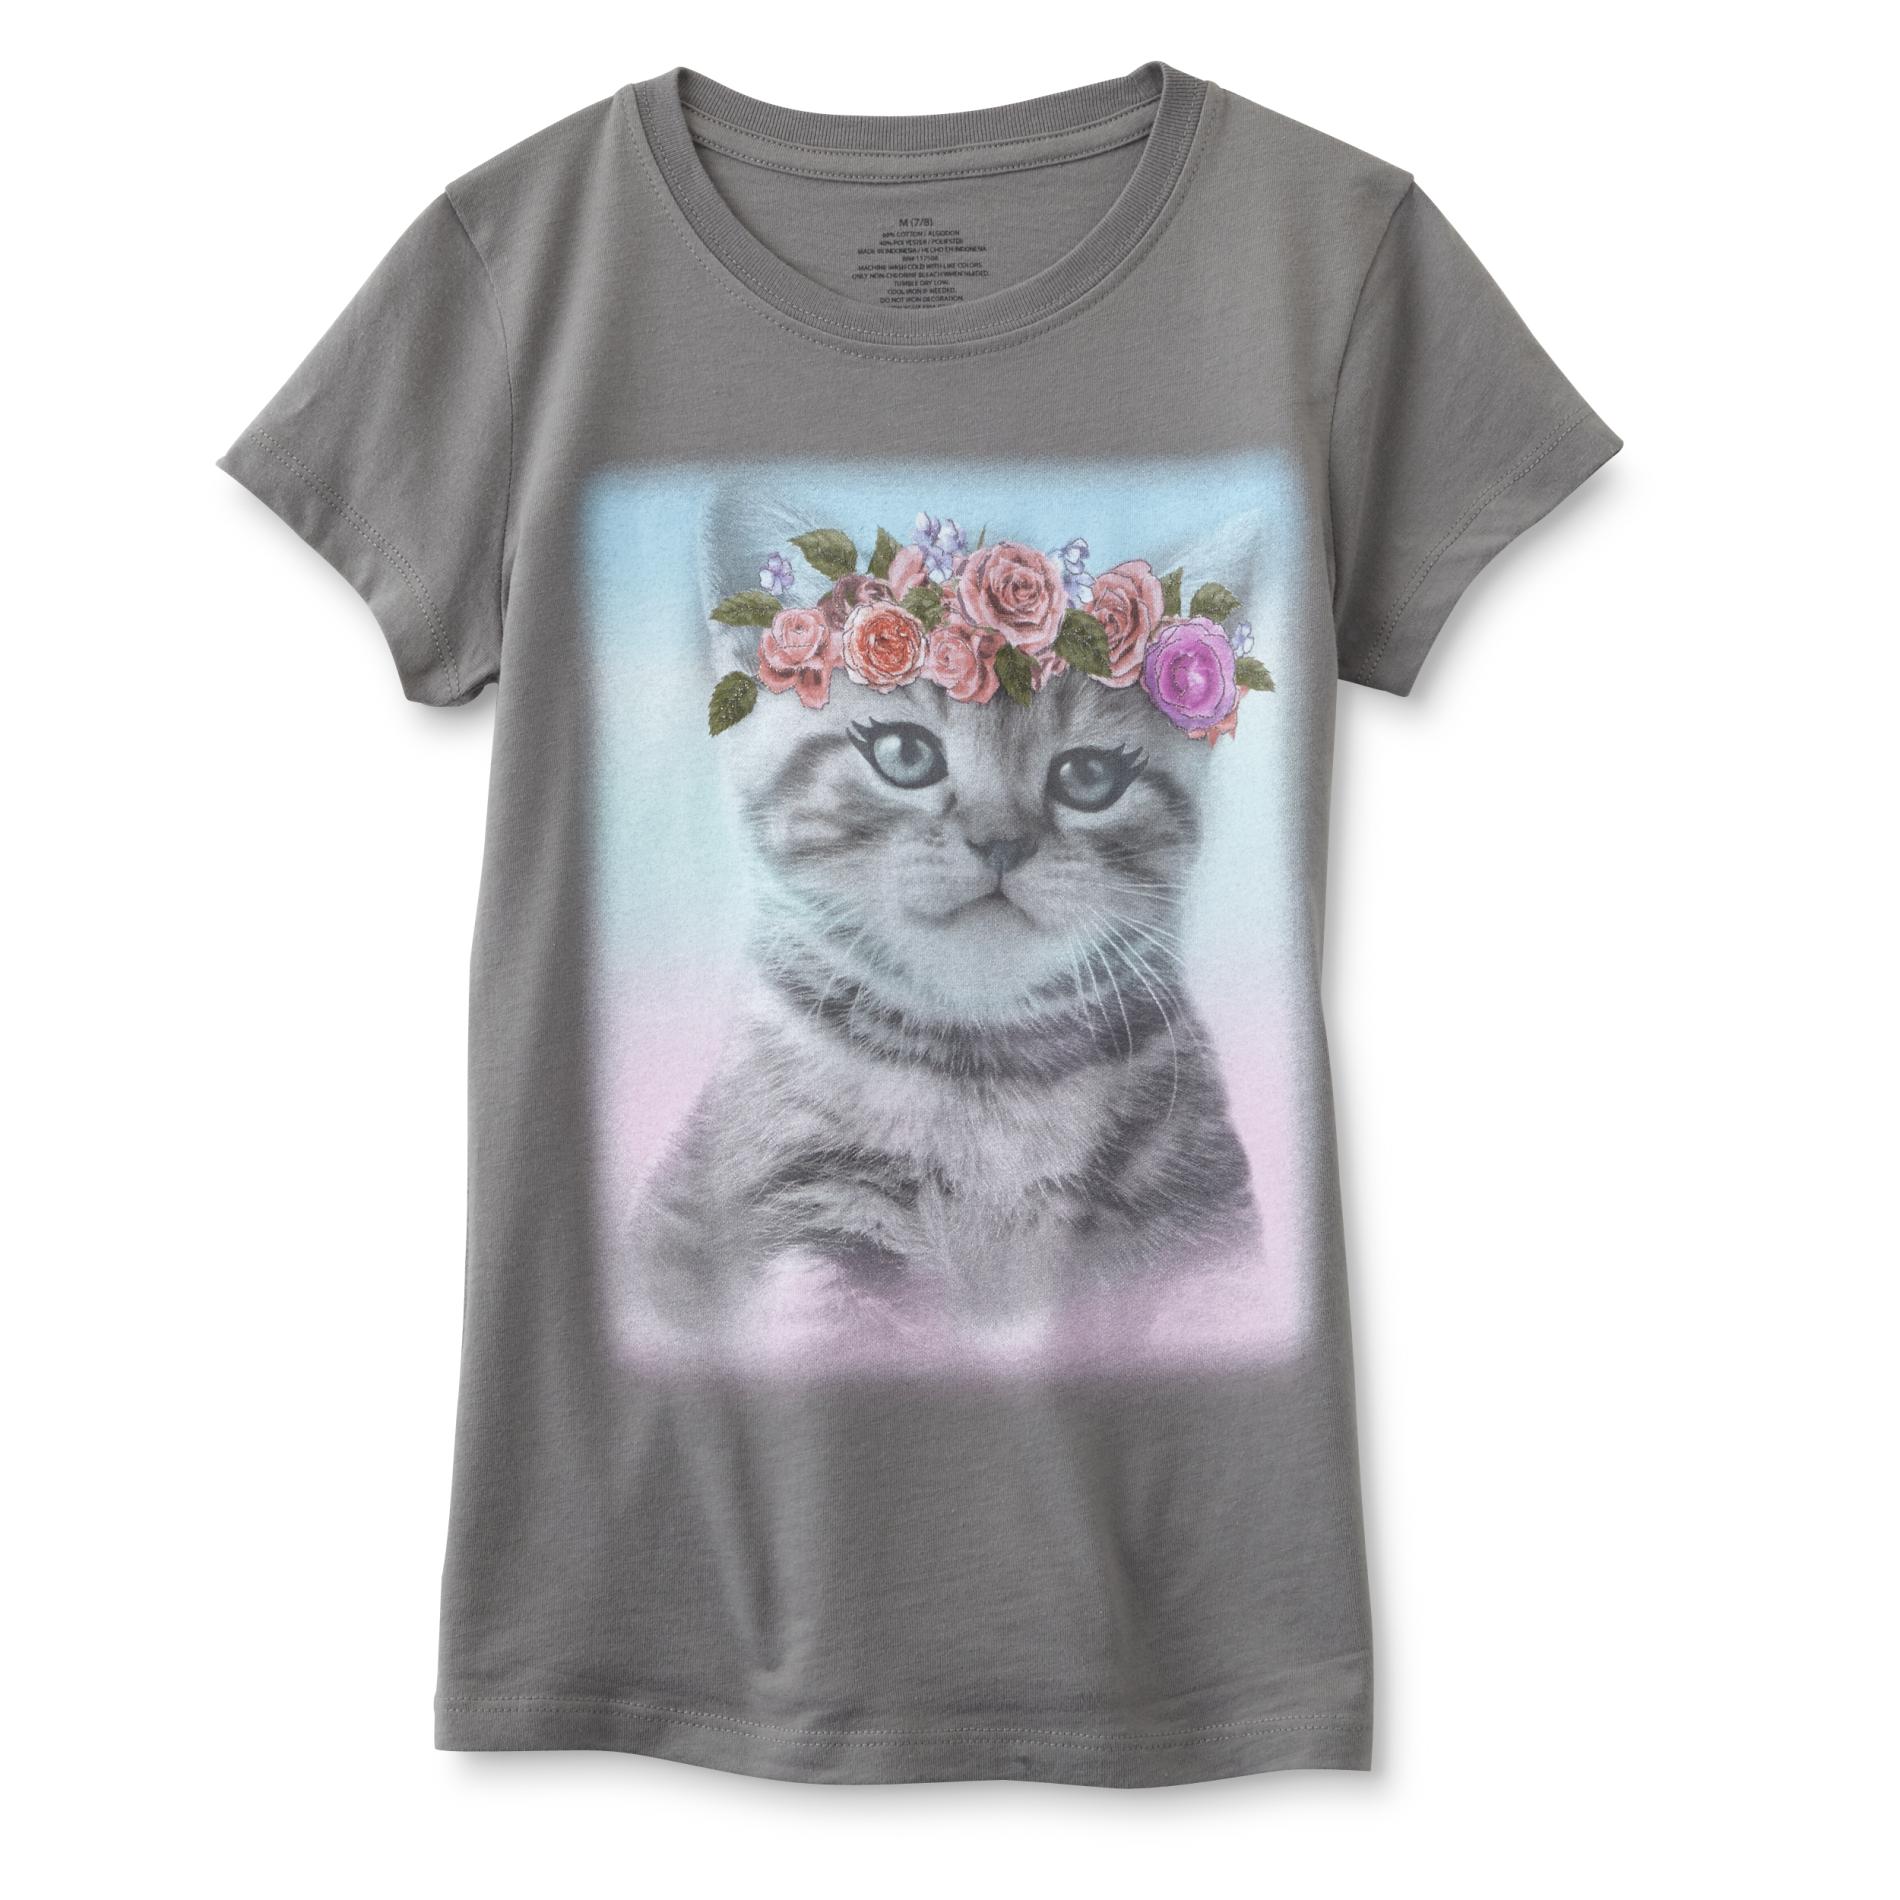 Route 66 Girl's Graphic T-Shirt - Cat